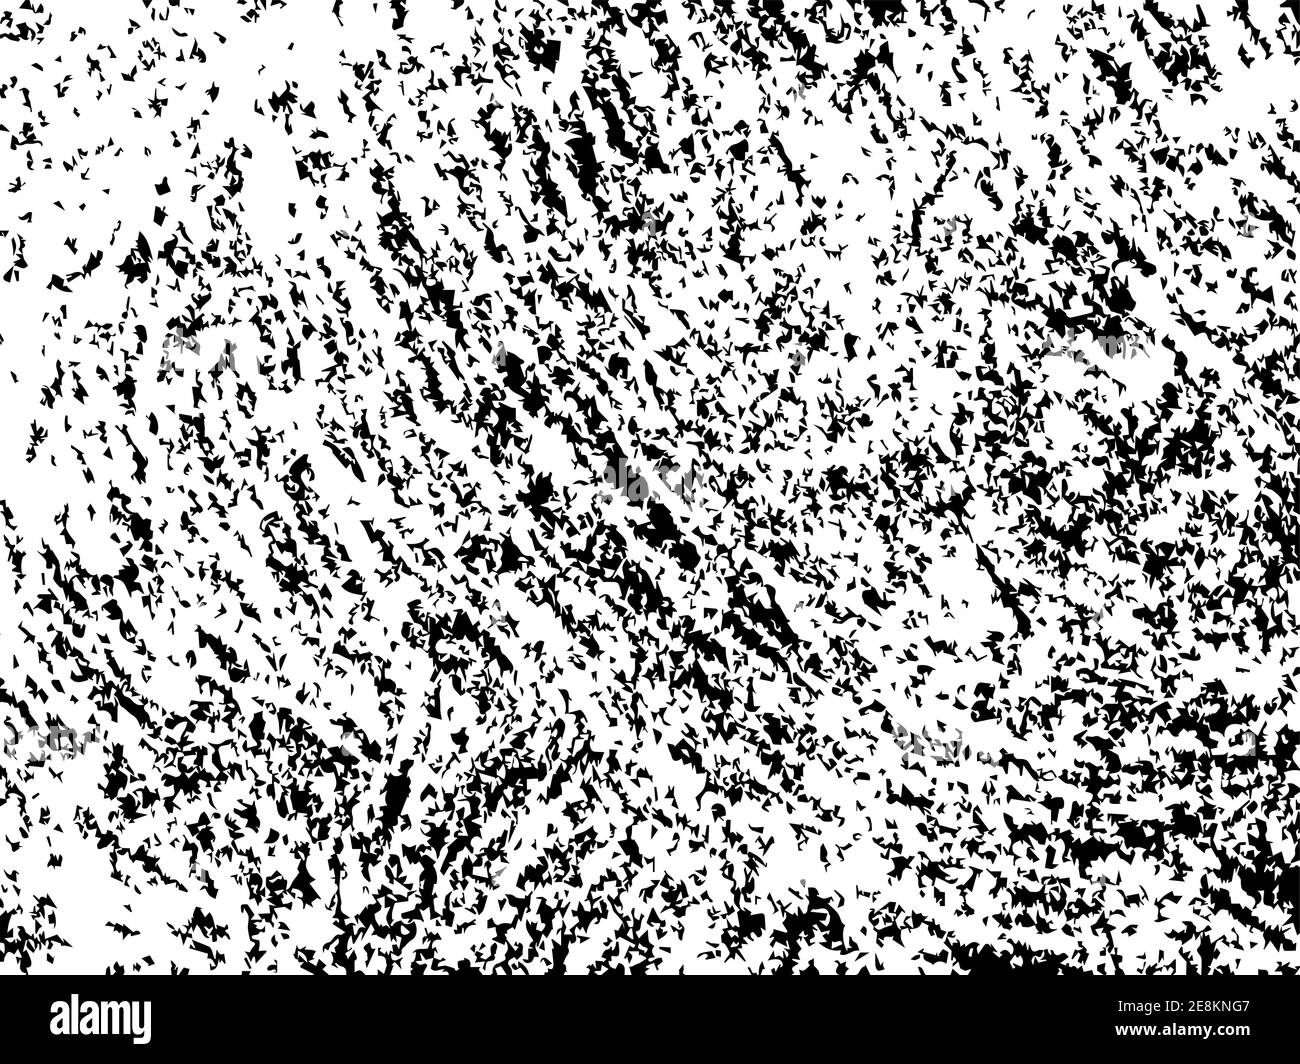 Grungy vector texture of brushed plaster wall. Rough brushed concrete surface. Black splatter on white background. Material design template. Textured Stock Vector